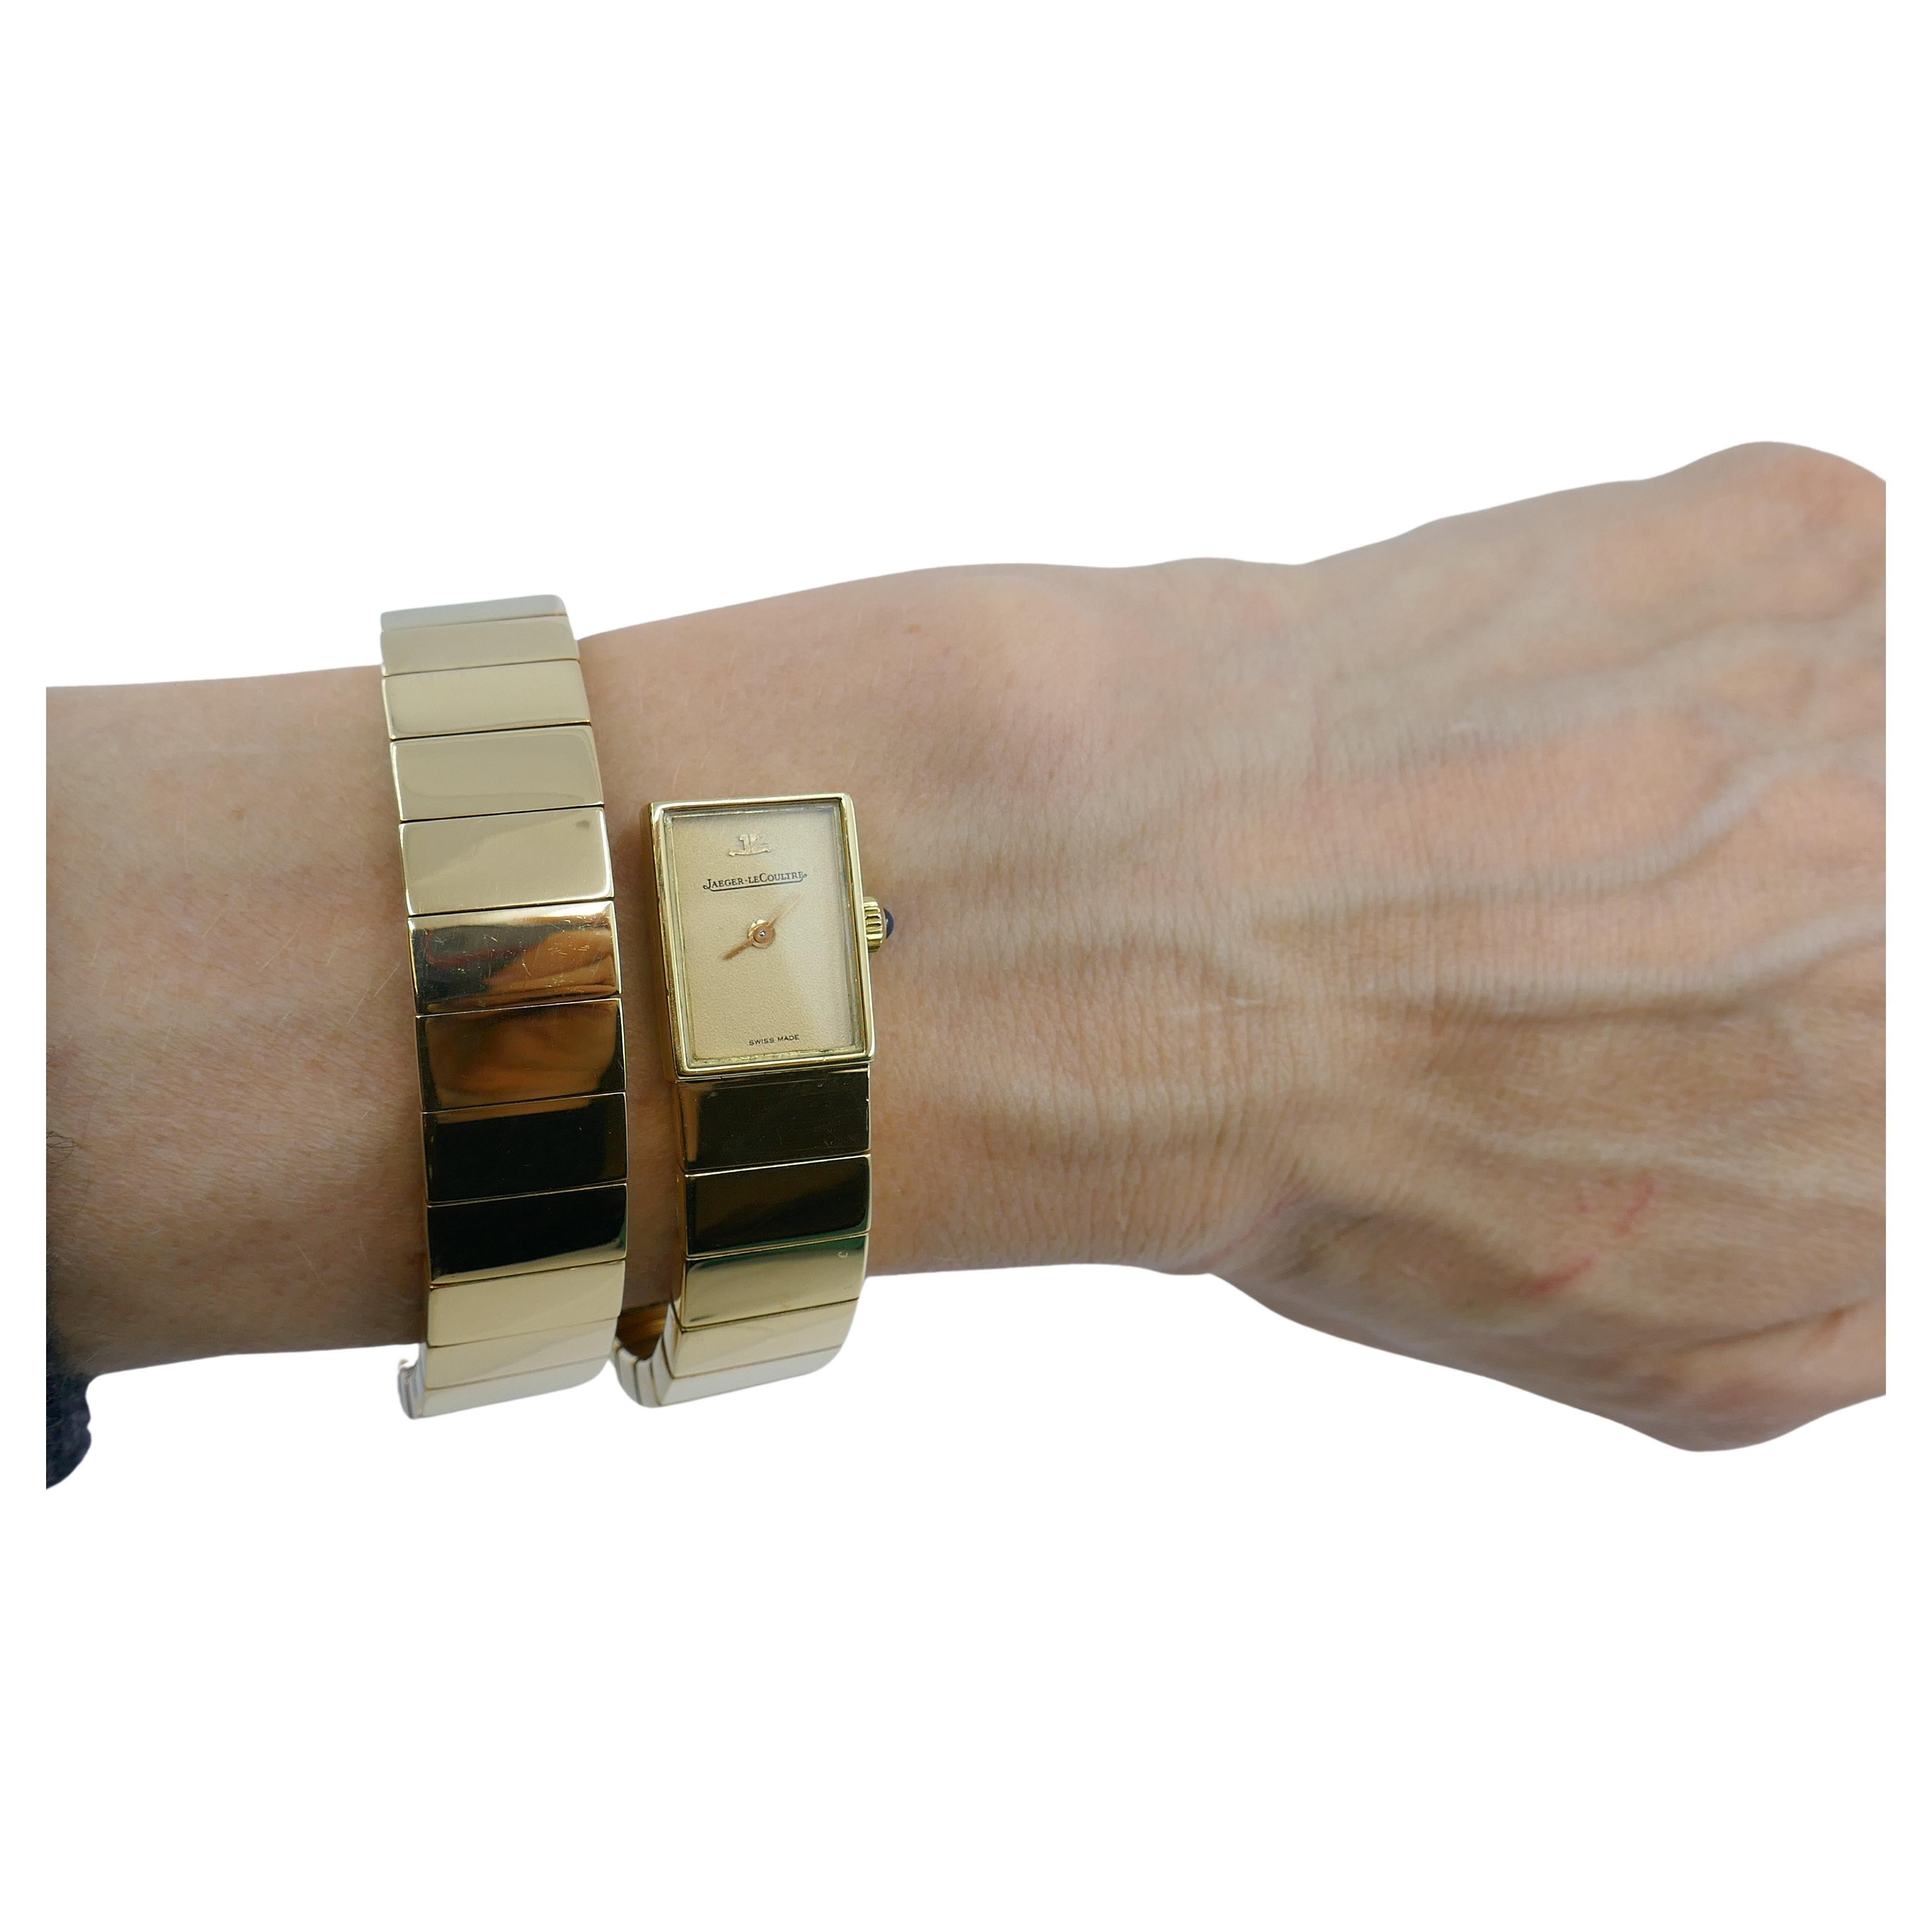 A chic vintage 18k gold watch by Jaeger-LeCoultre. The watch is circa 1950s and carries an amazing timeless look of the Mid-century modern style.
The bracelet of tubogas design features high-polished gold, tile-like links. The links look great along